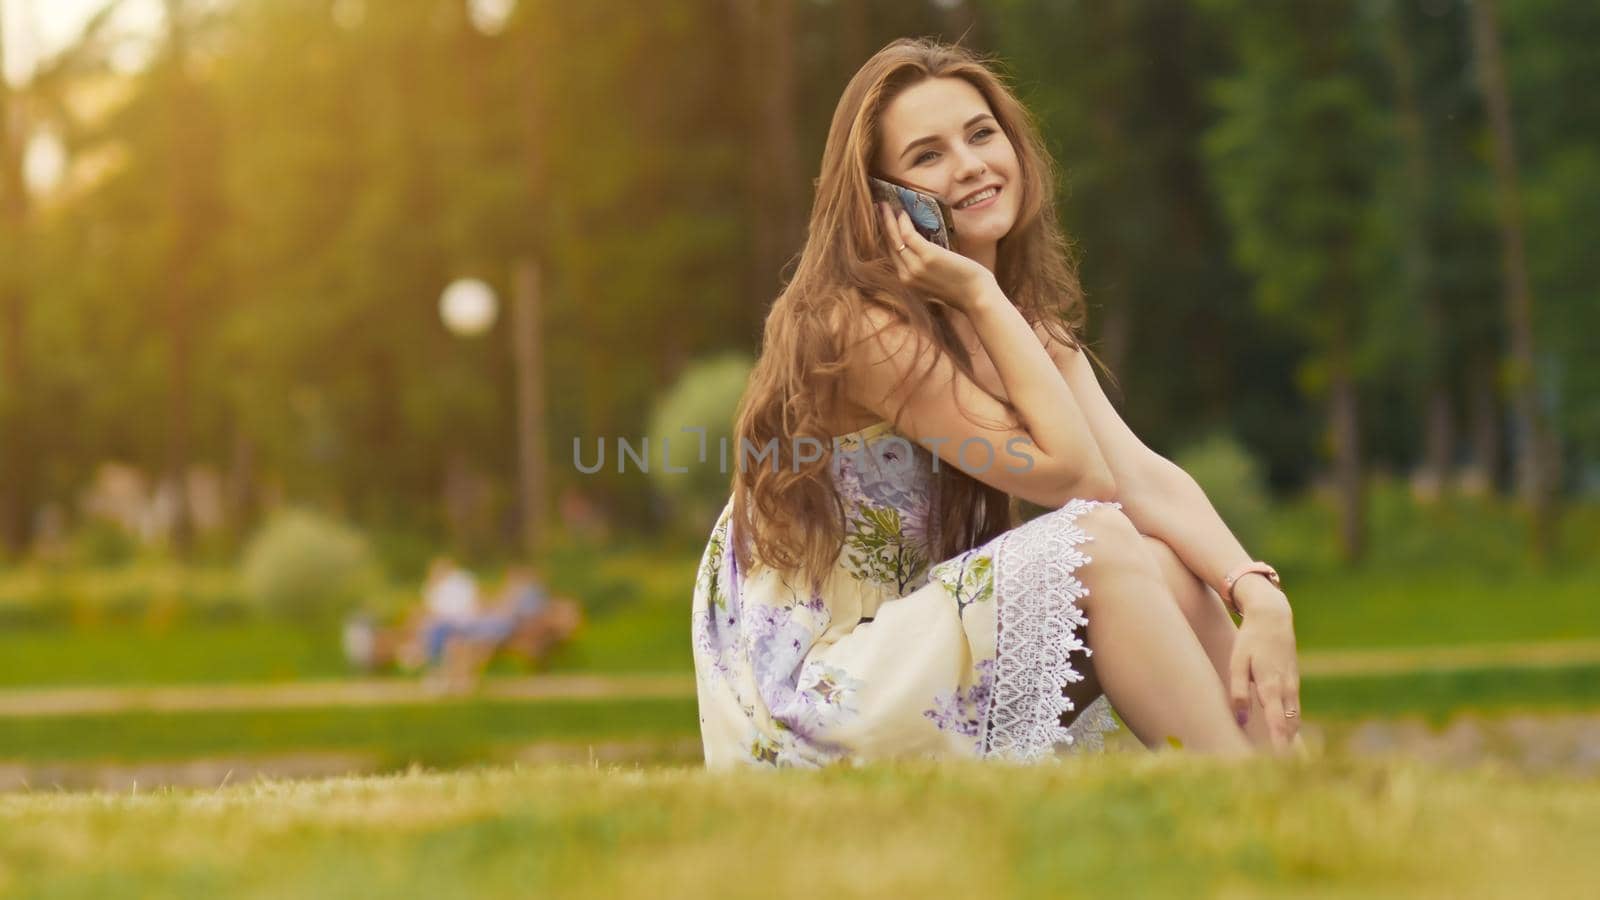 Young beautiful woman in summer dress with long hair sitting on grass in green park and talking on the phone, smiling. Summer. Recreation. Youth